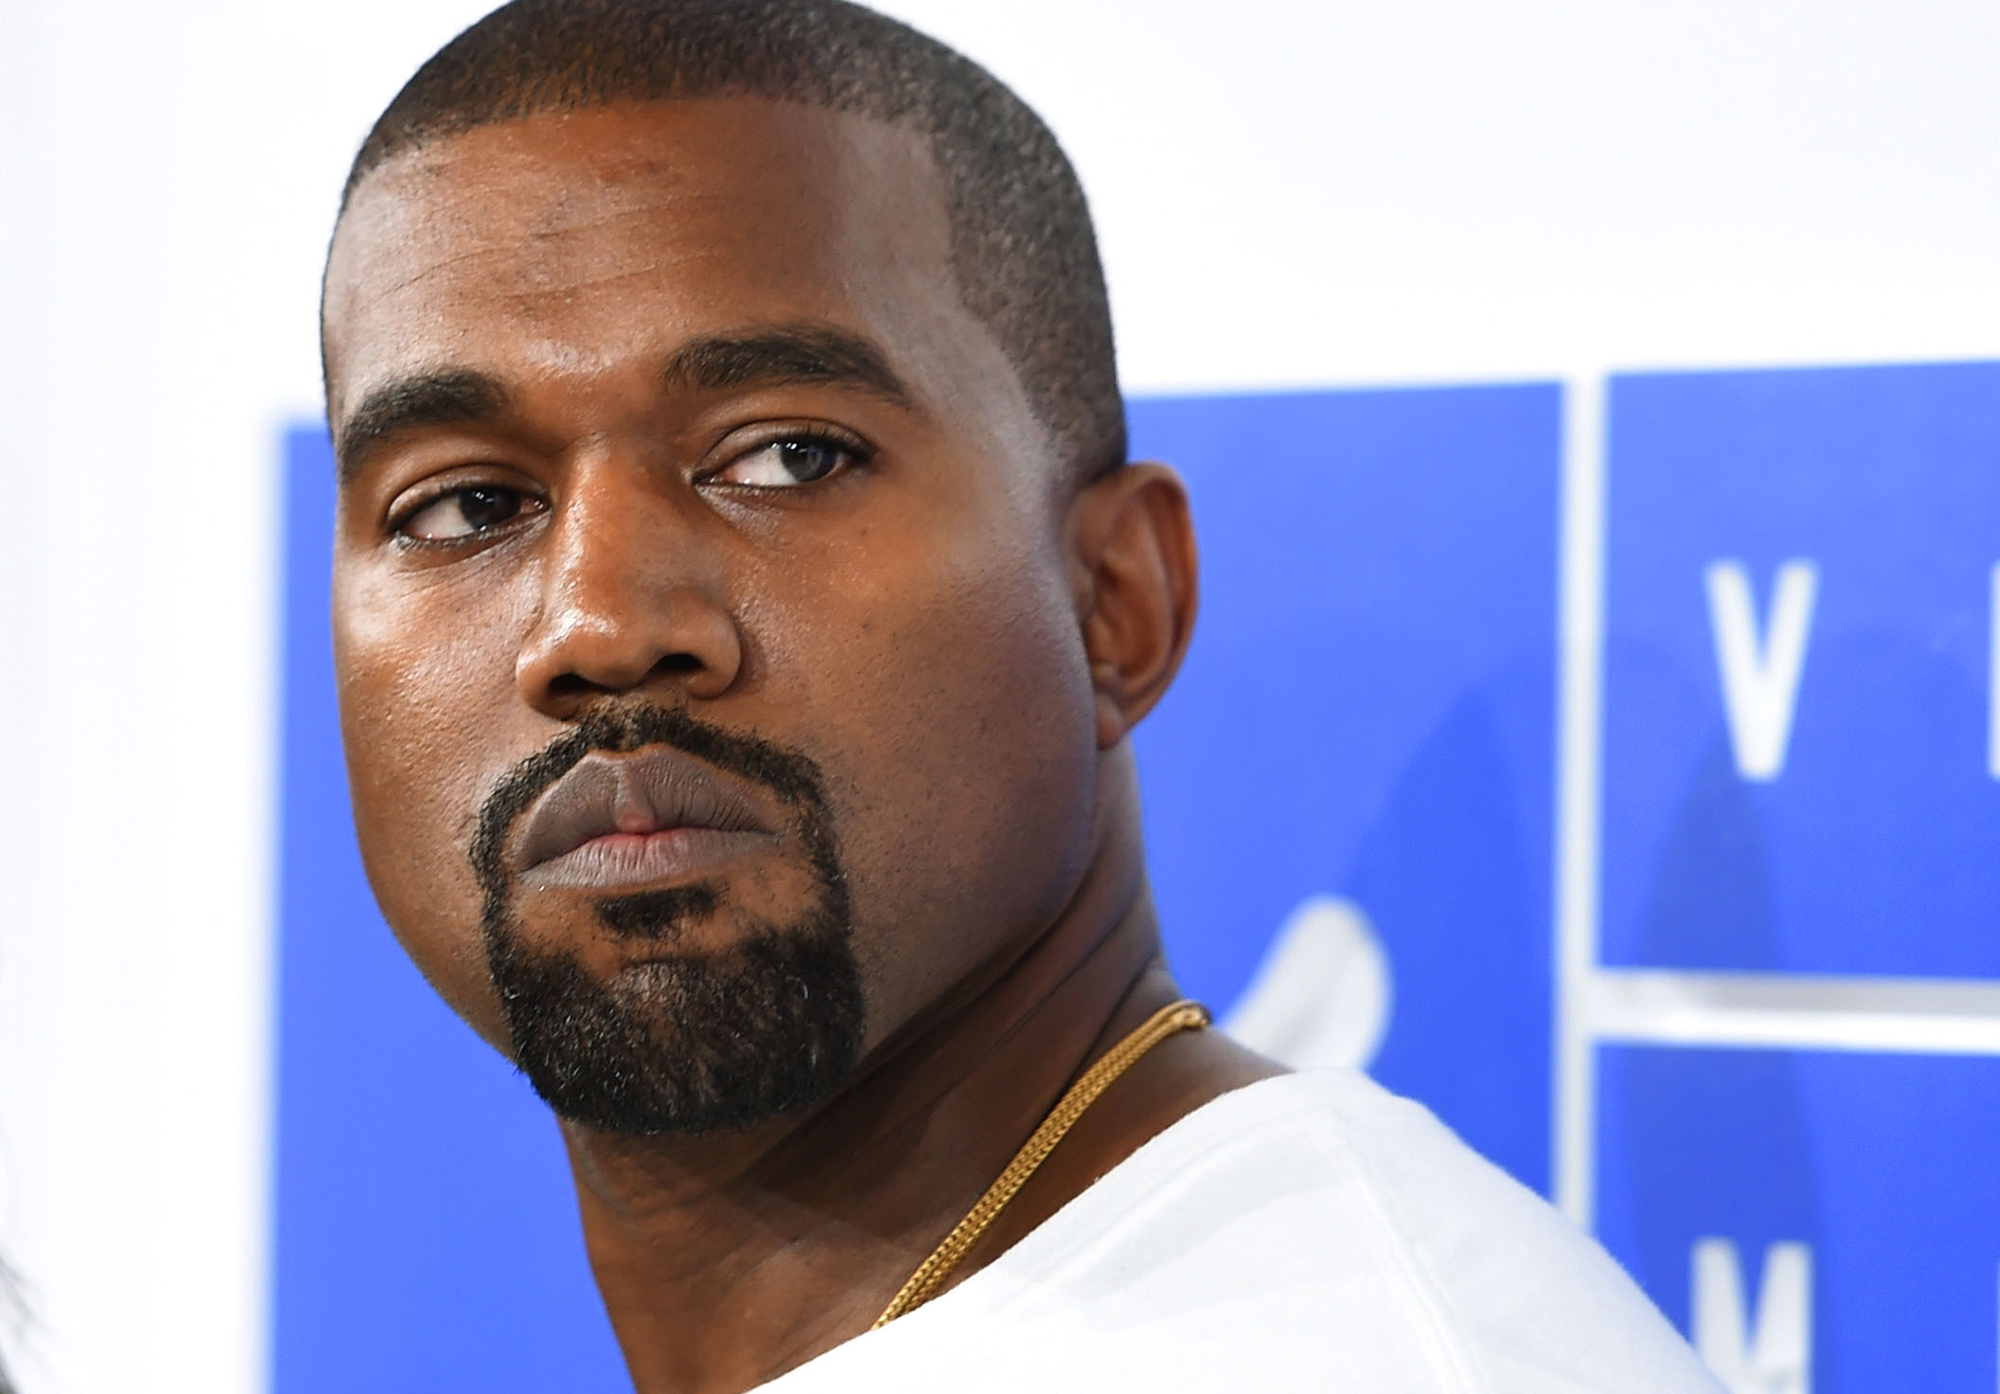 Kanye West Is Focused On Apparel Line Launch Gap Ceo Says Bloomberg